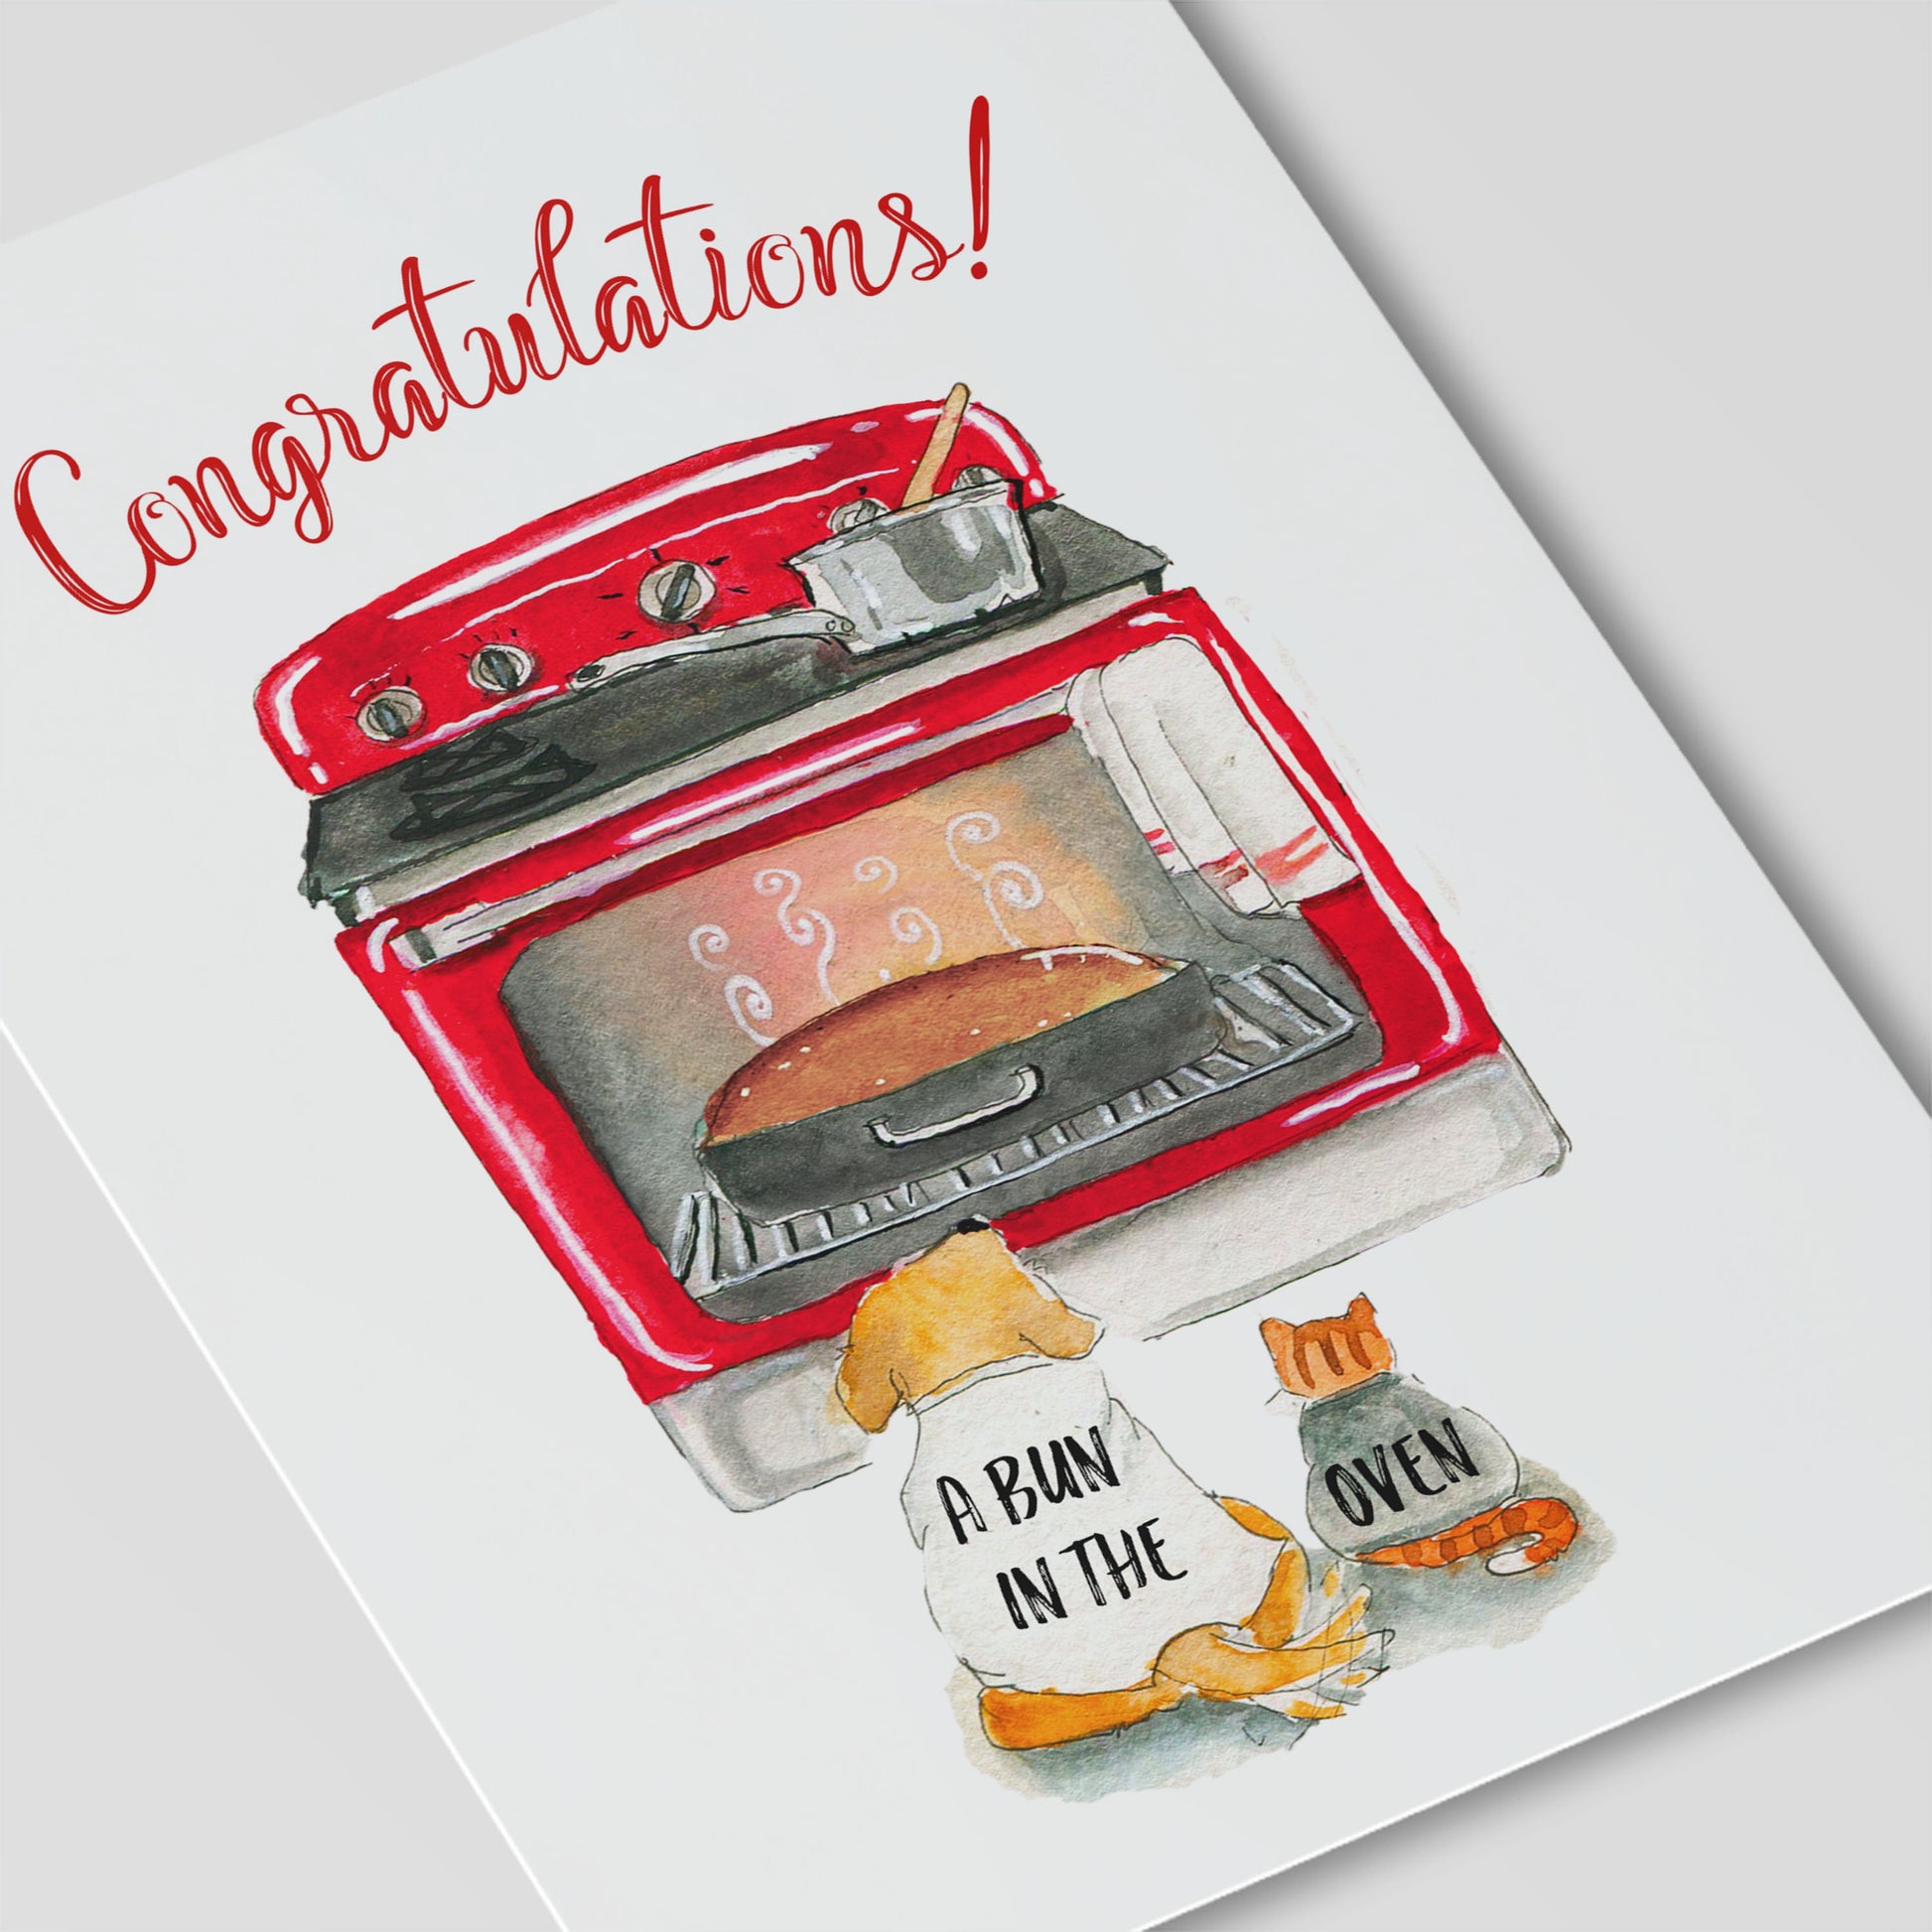 Congratulations Pregnancy Card Funny - Bun In the Oven Baby Shower Cards